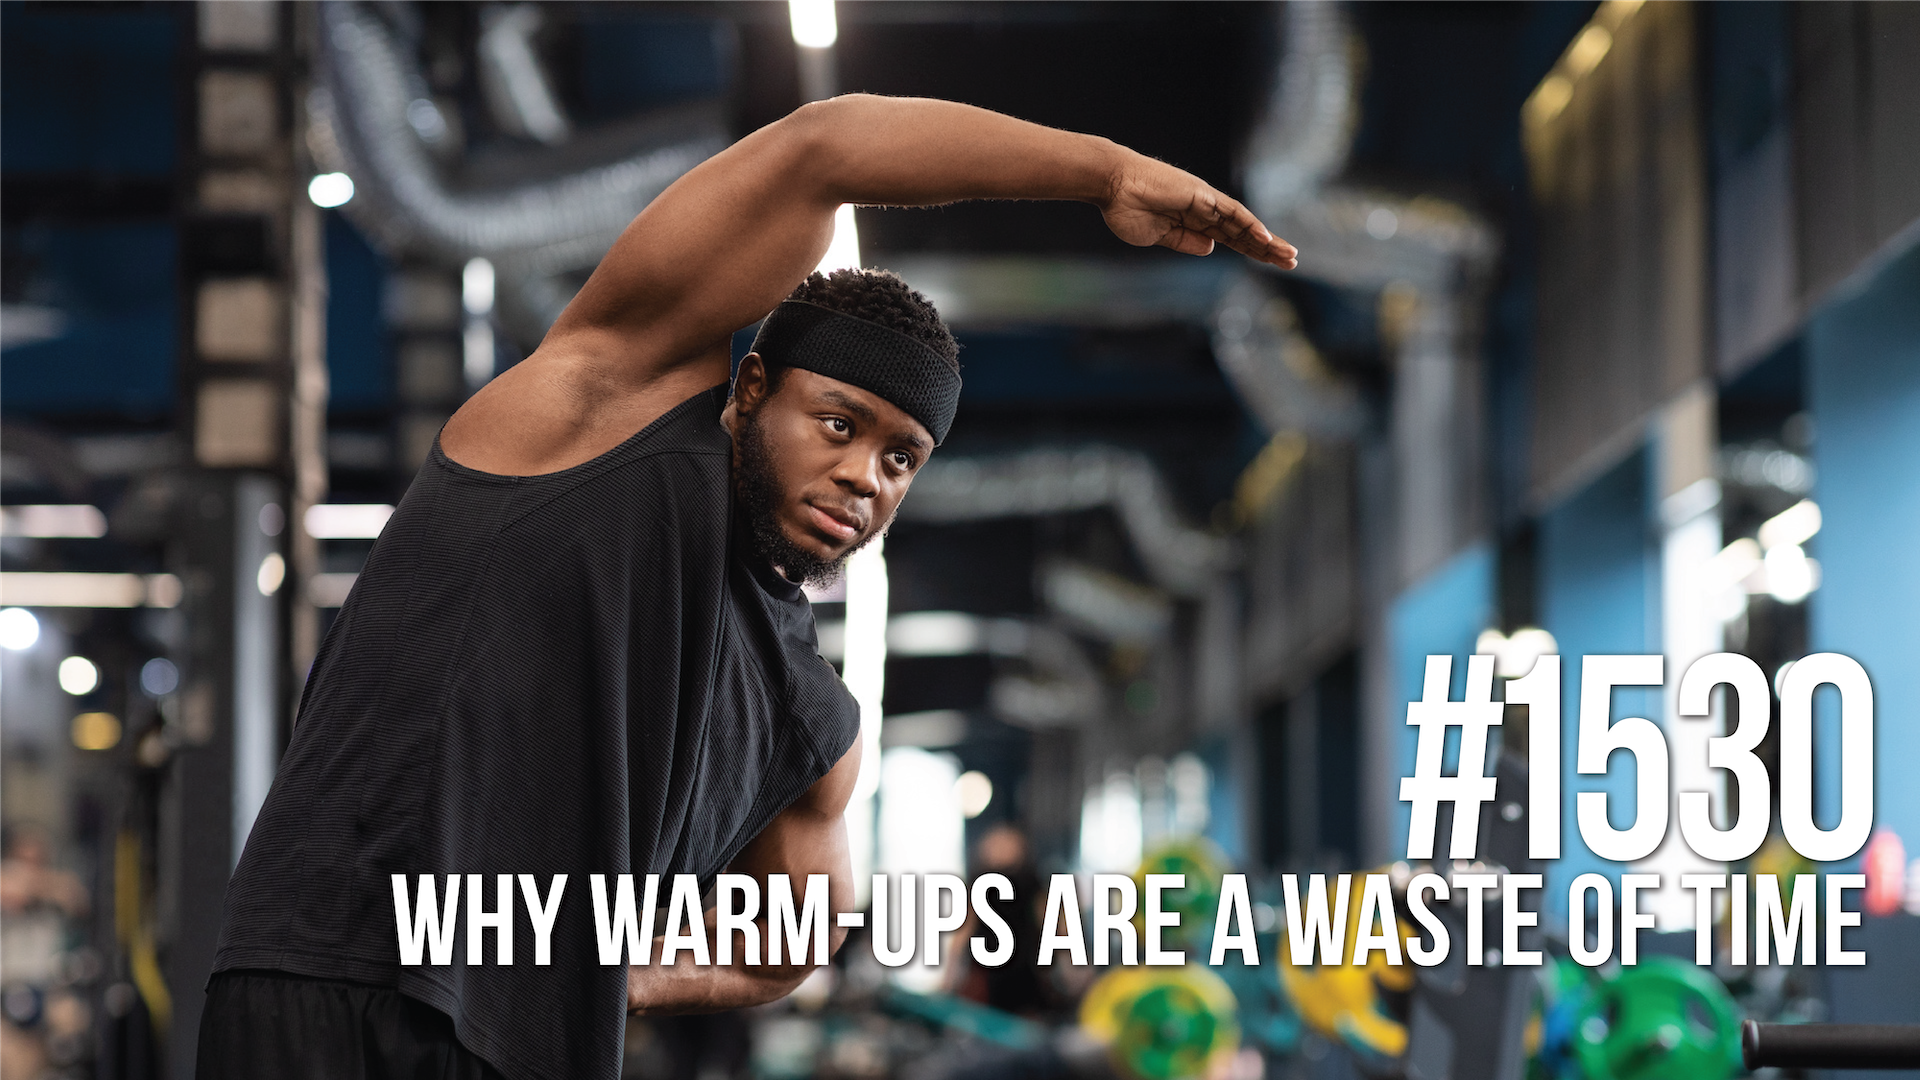 1530: Why Warm-Ups Are a Waste of Time